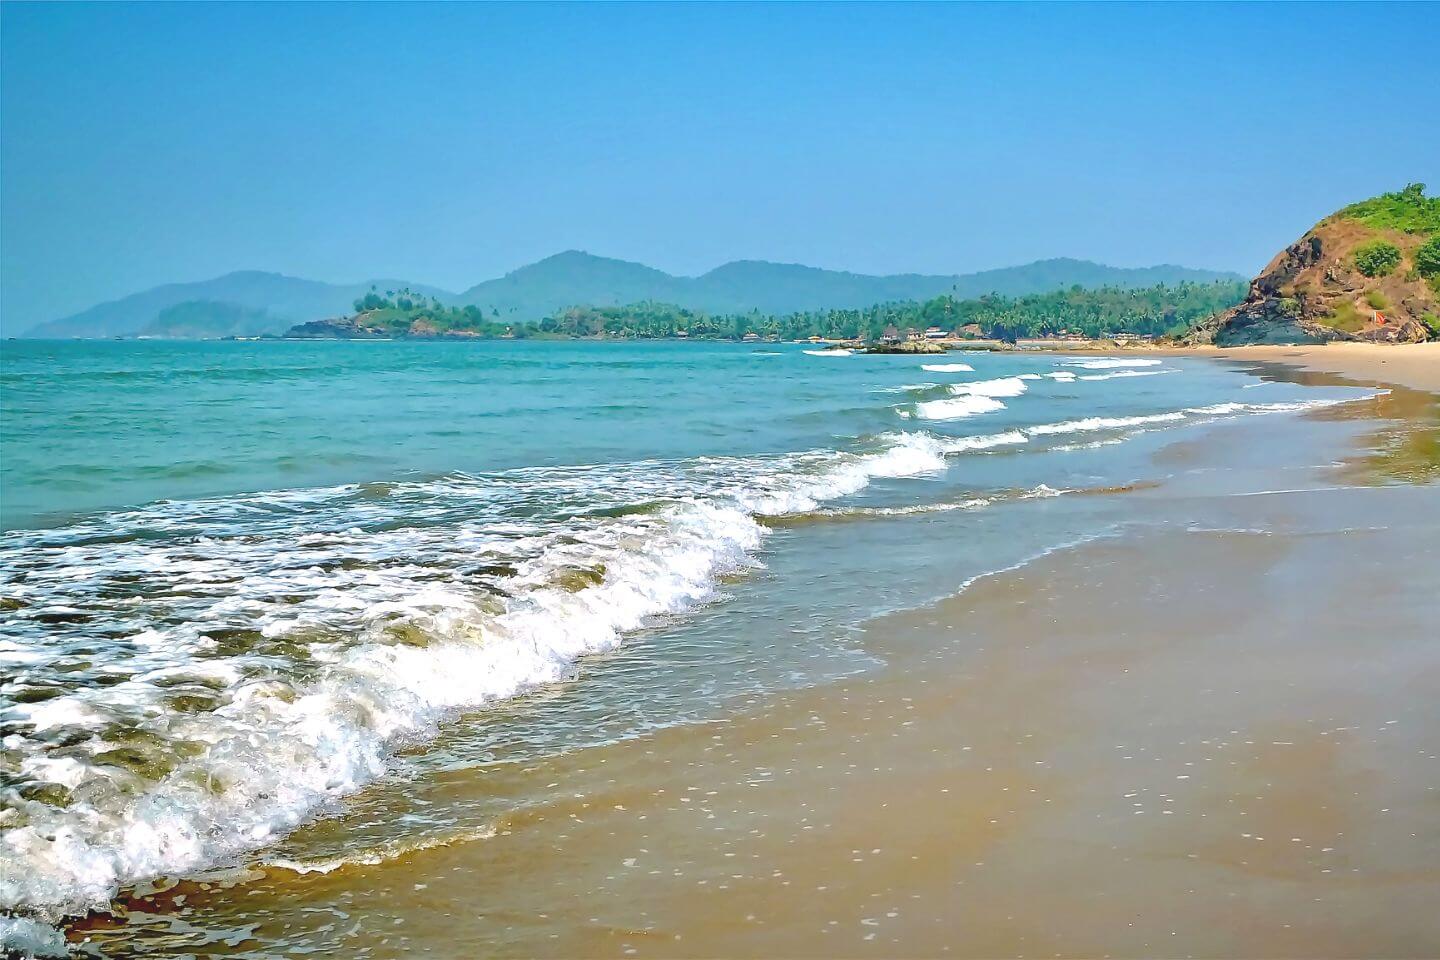 Palolem Beach Goa, India (Location, Activities, Night Life, Images, Facts & Things to do)